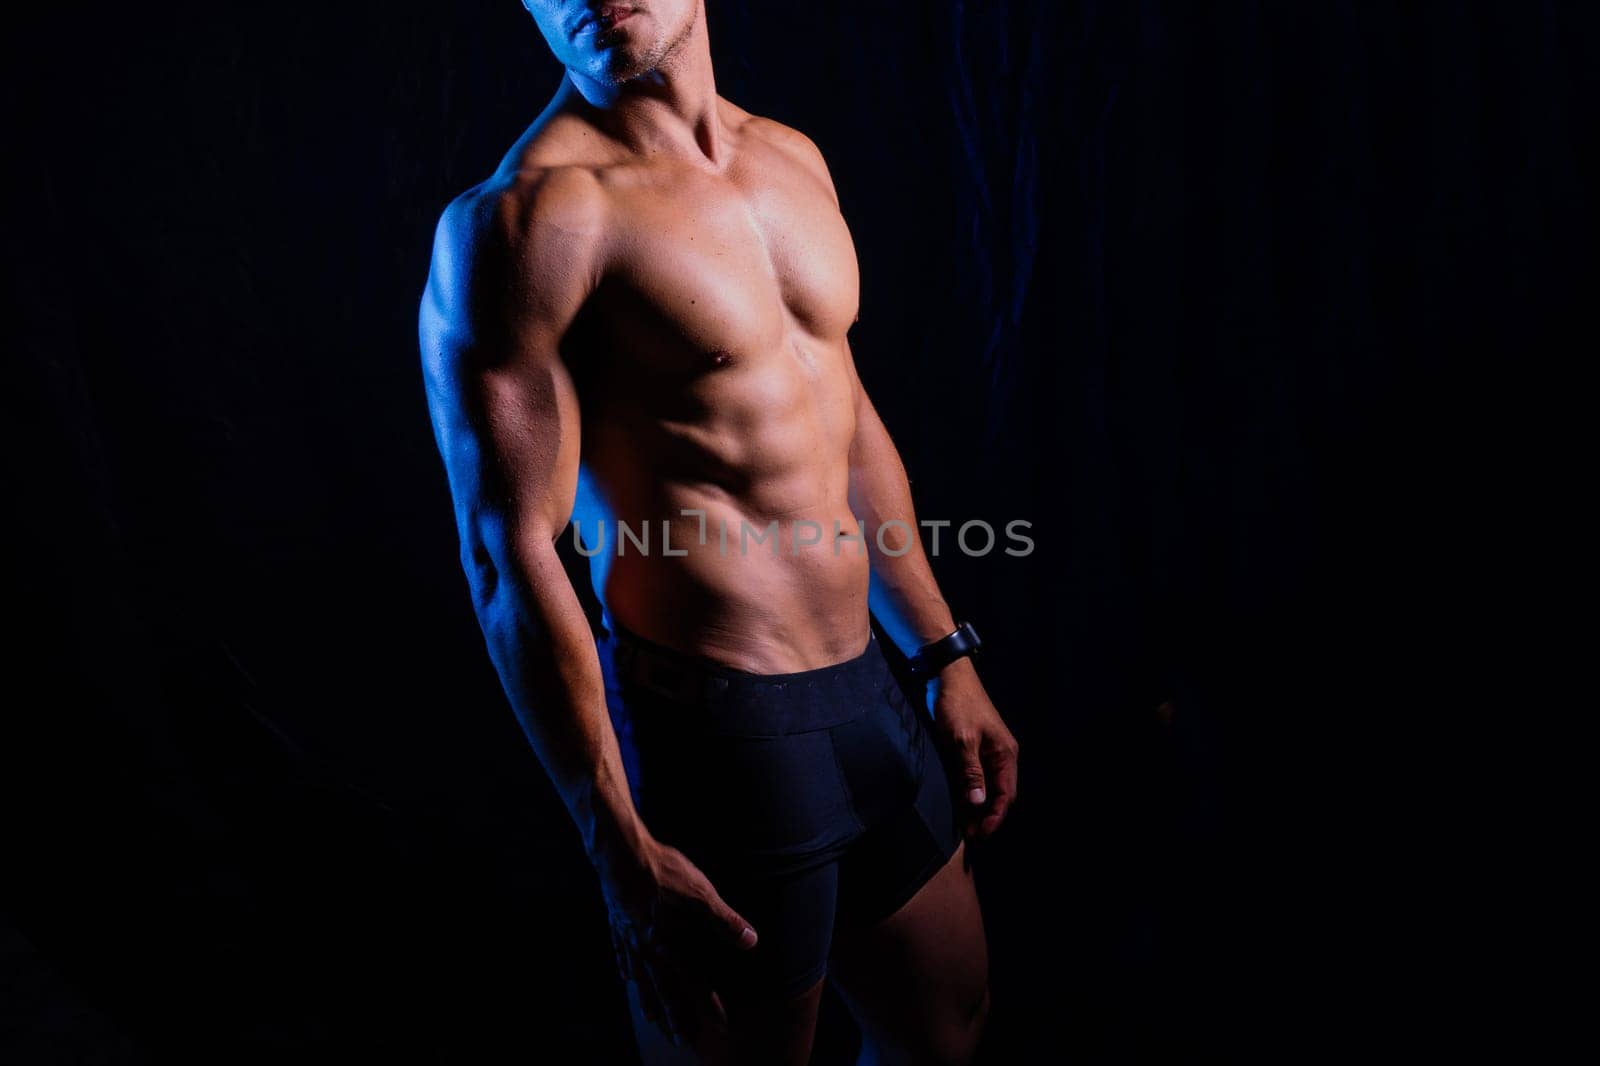 Man with exposed torso poses against black backdrop for flash photography by Zelenin